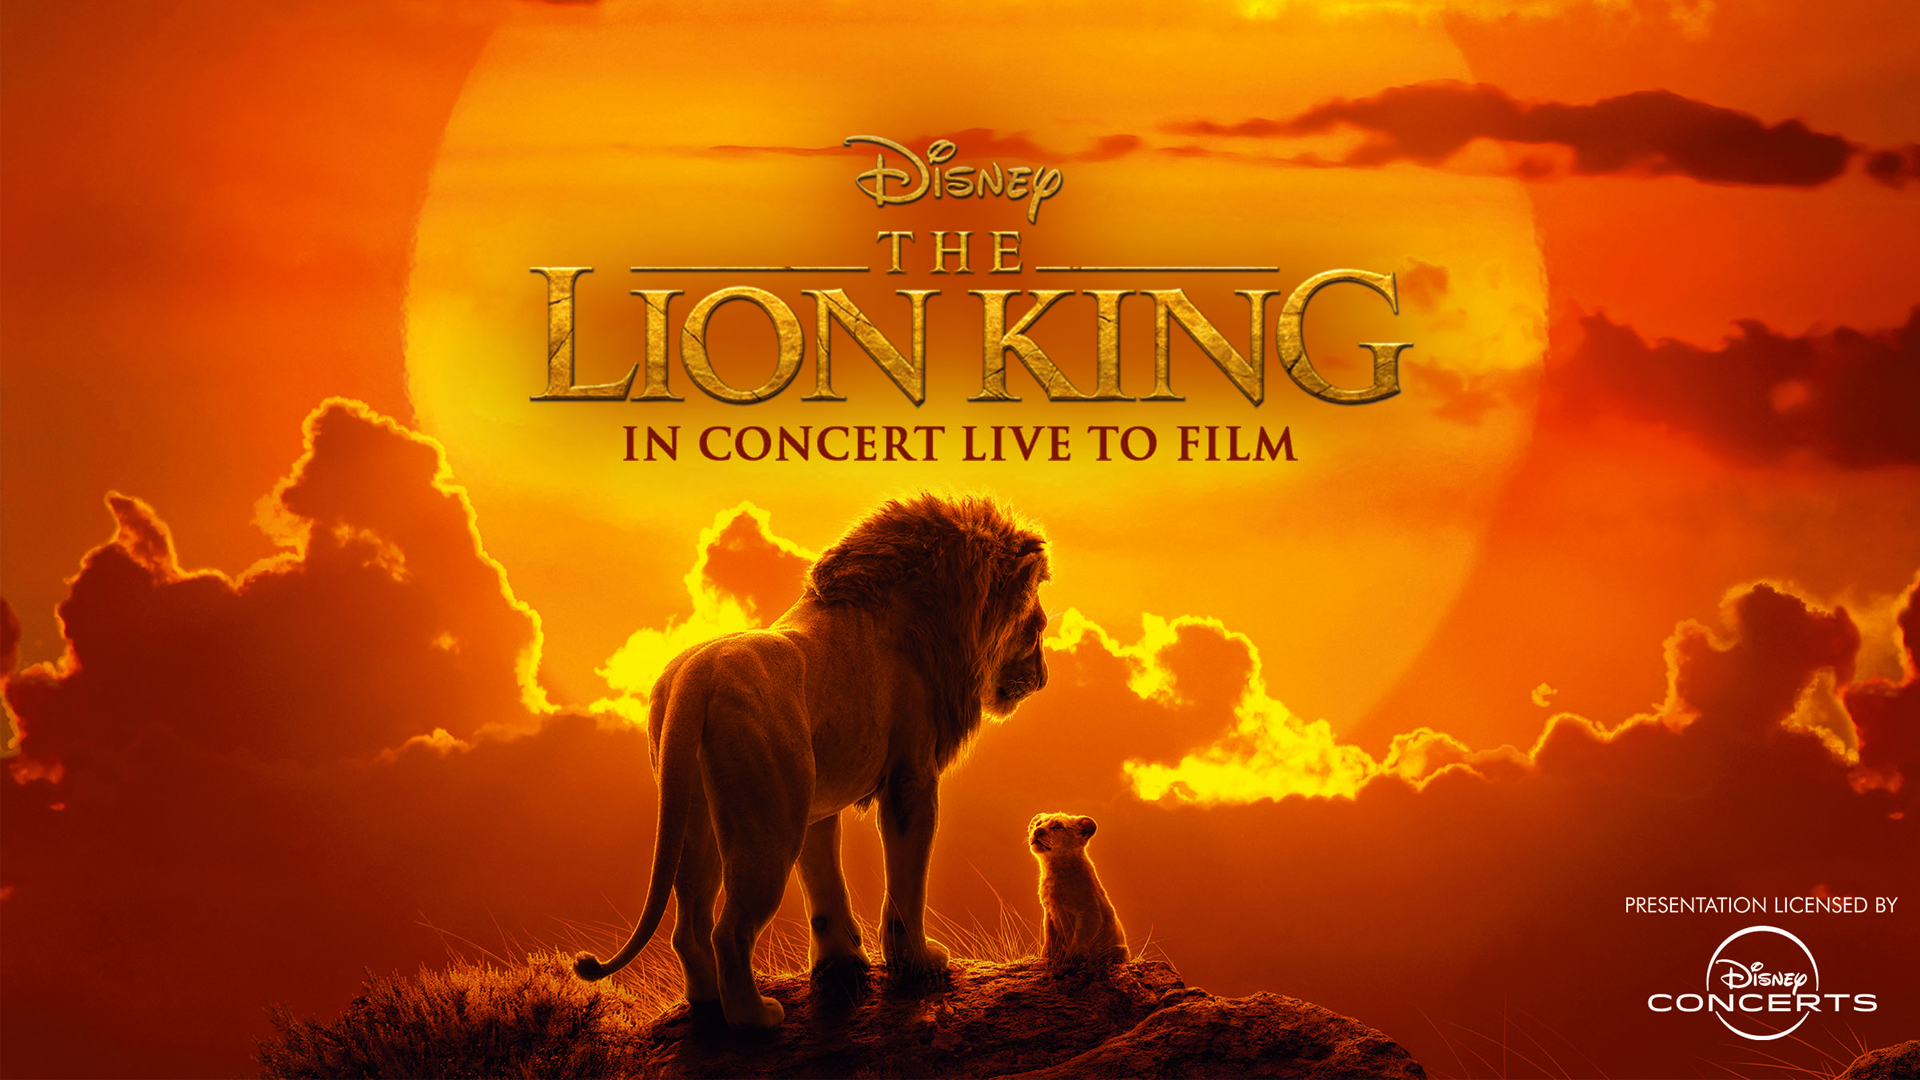 The Lion King in Concert Live to Film